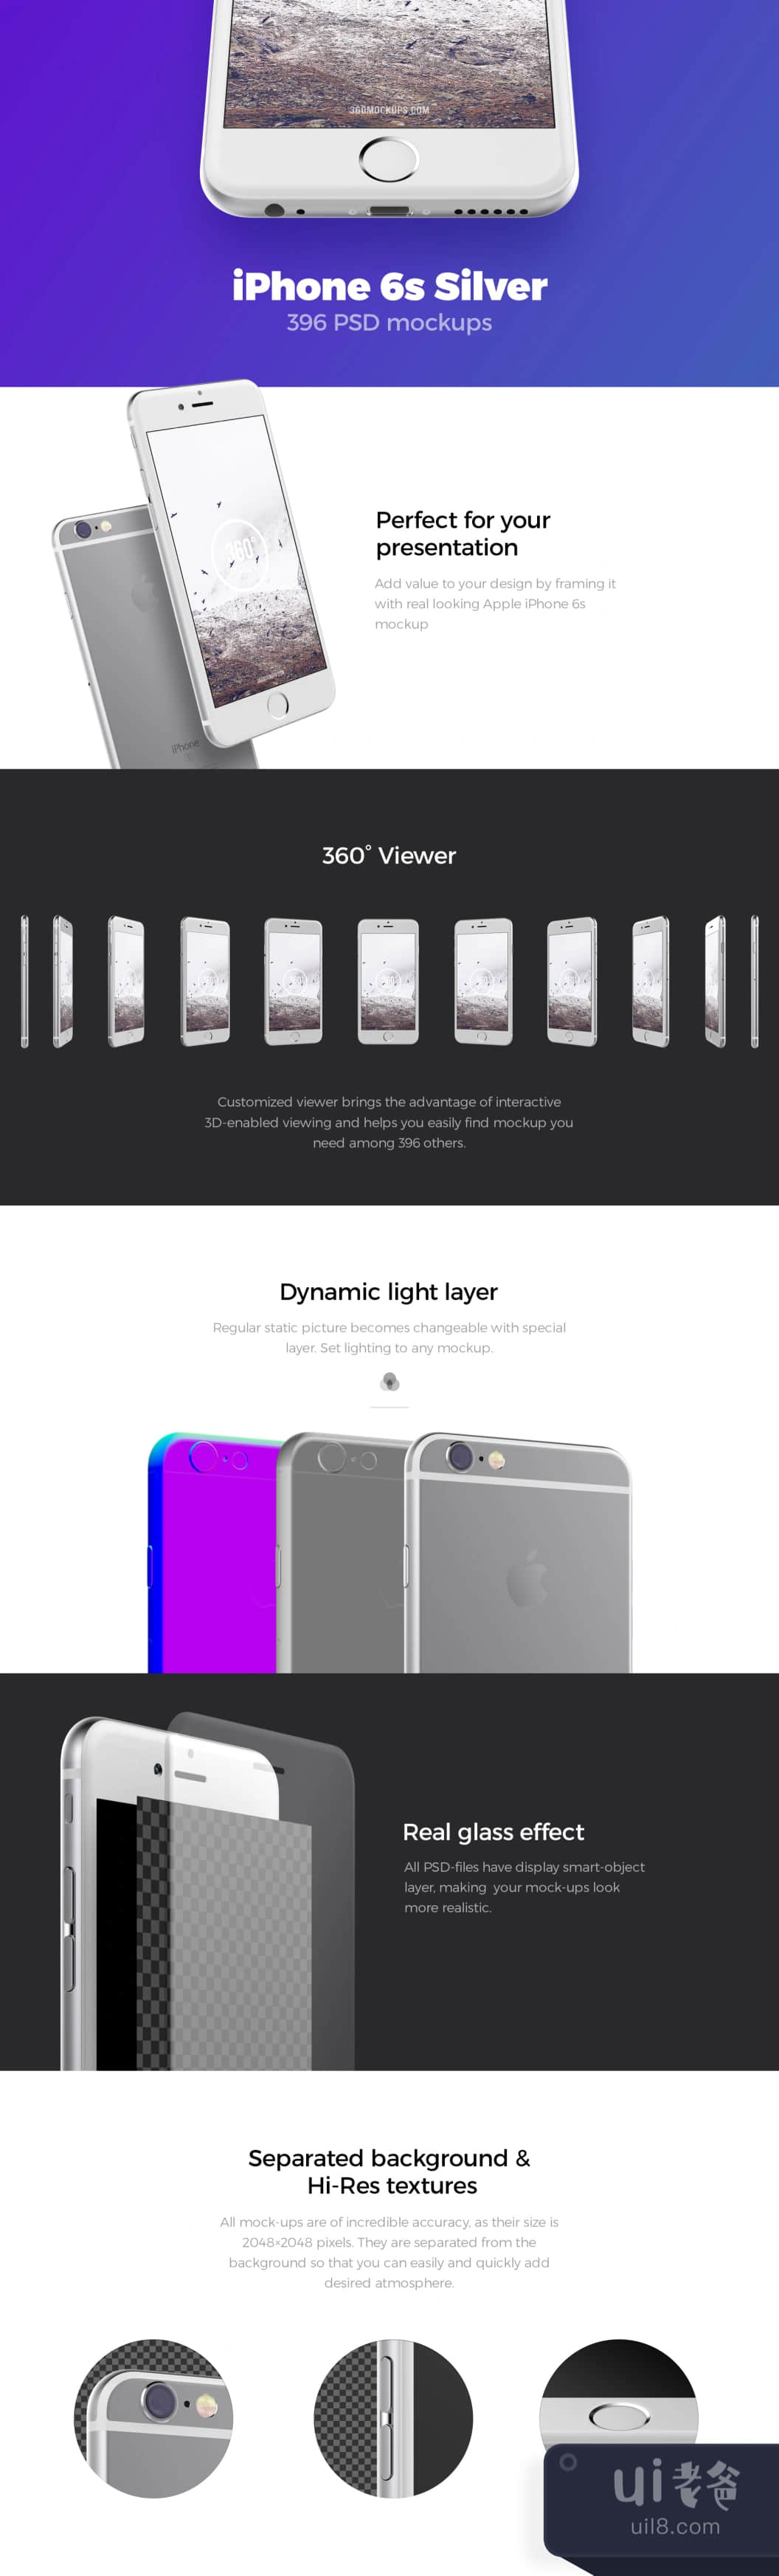 iPhone 6s银色模拟图 (iPhone 6s Silver mockups)插图